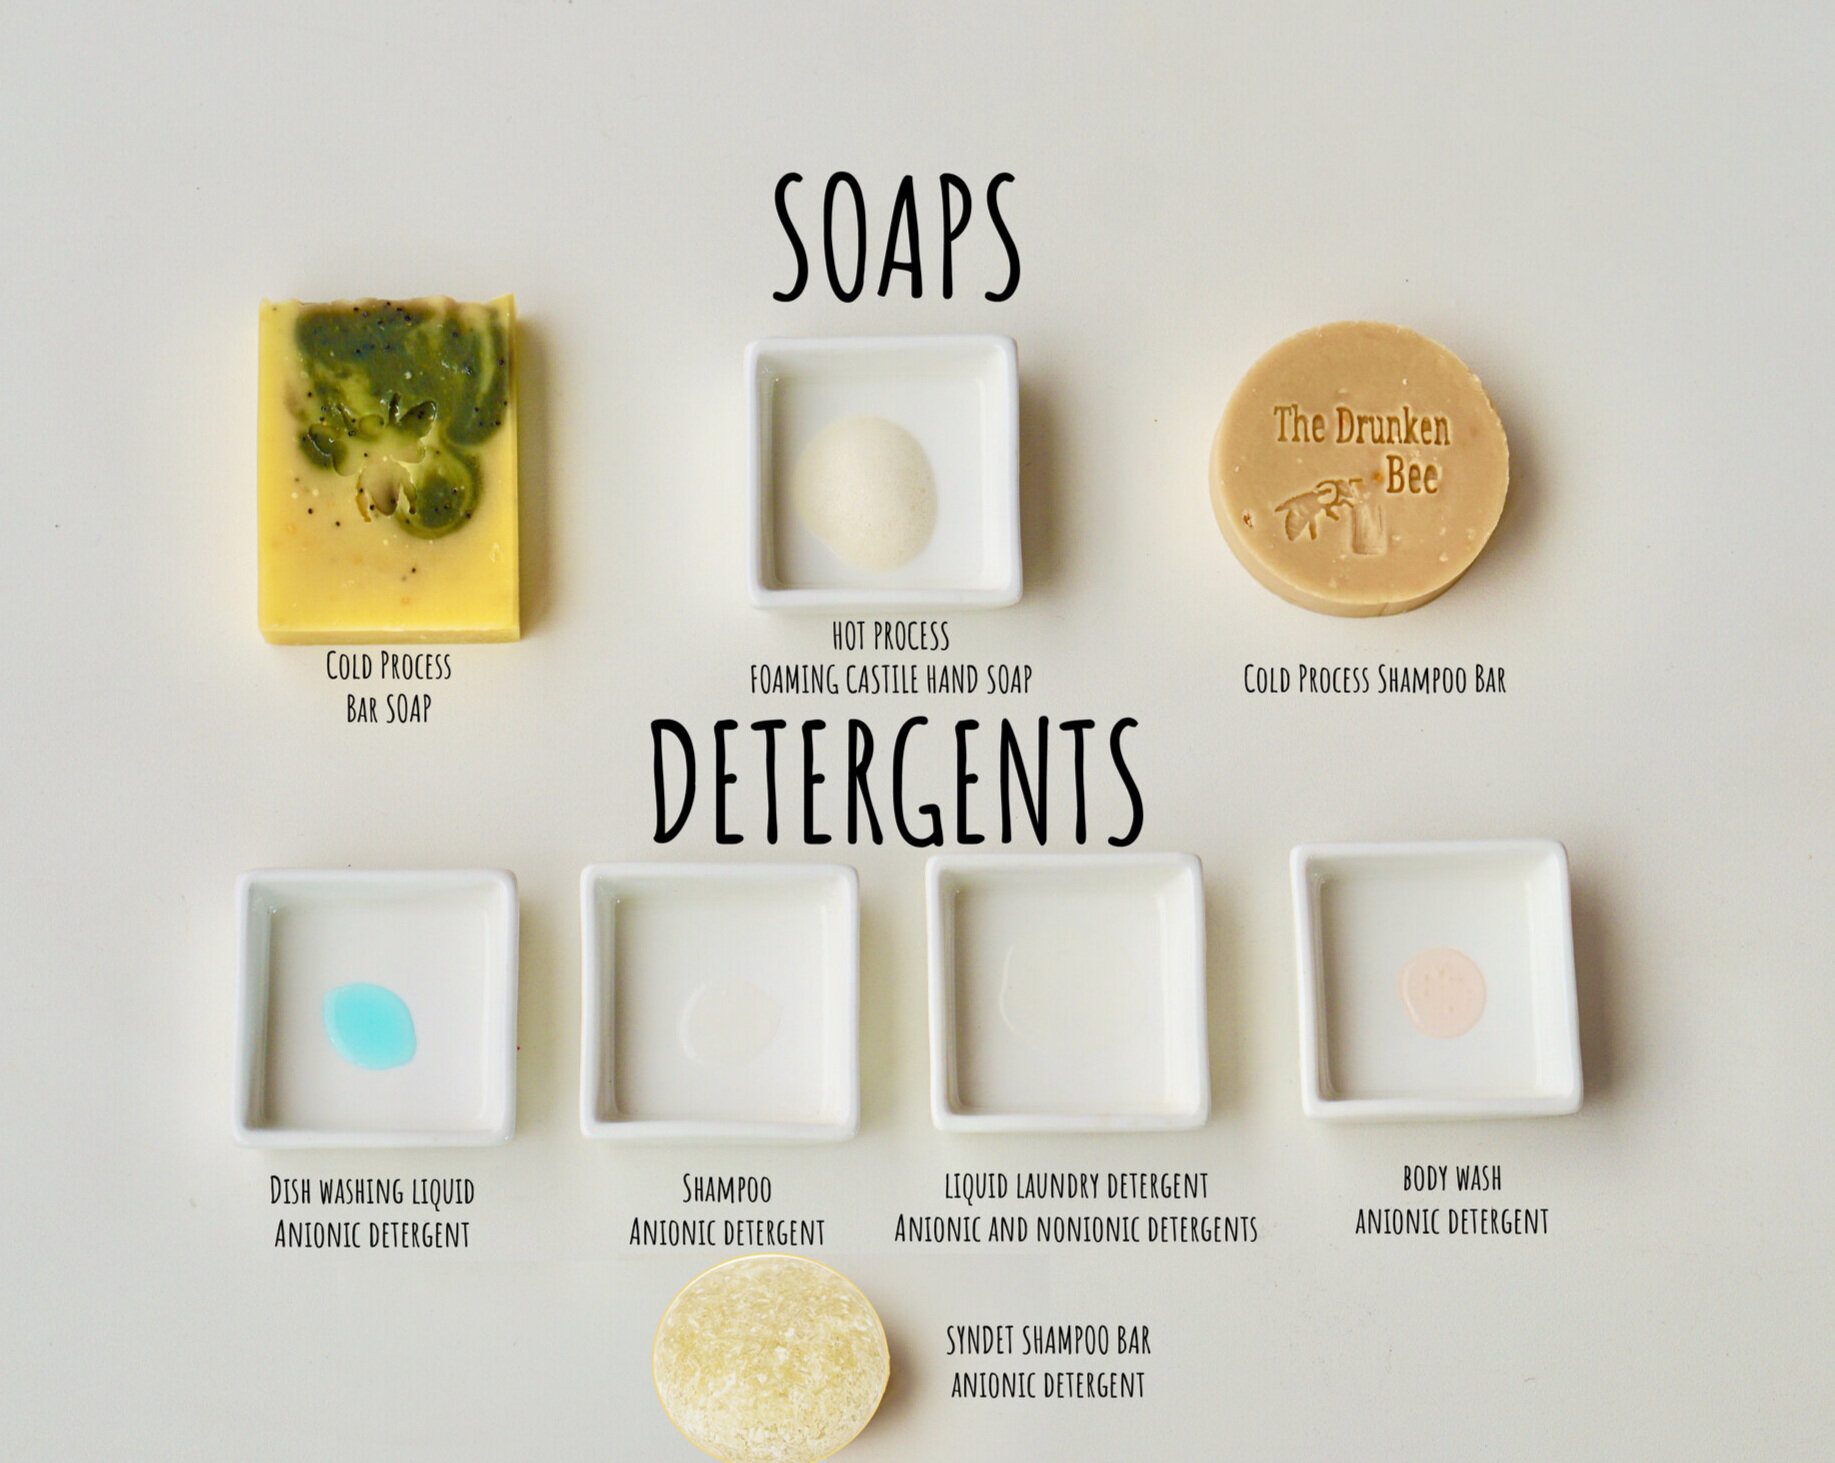 example of biodegradable detergent